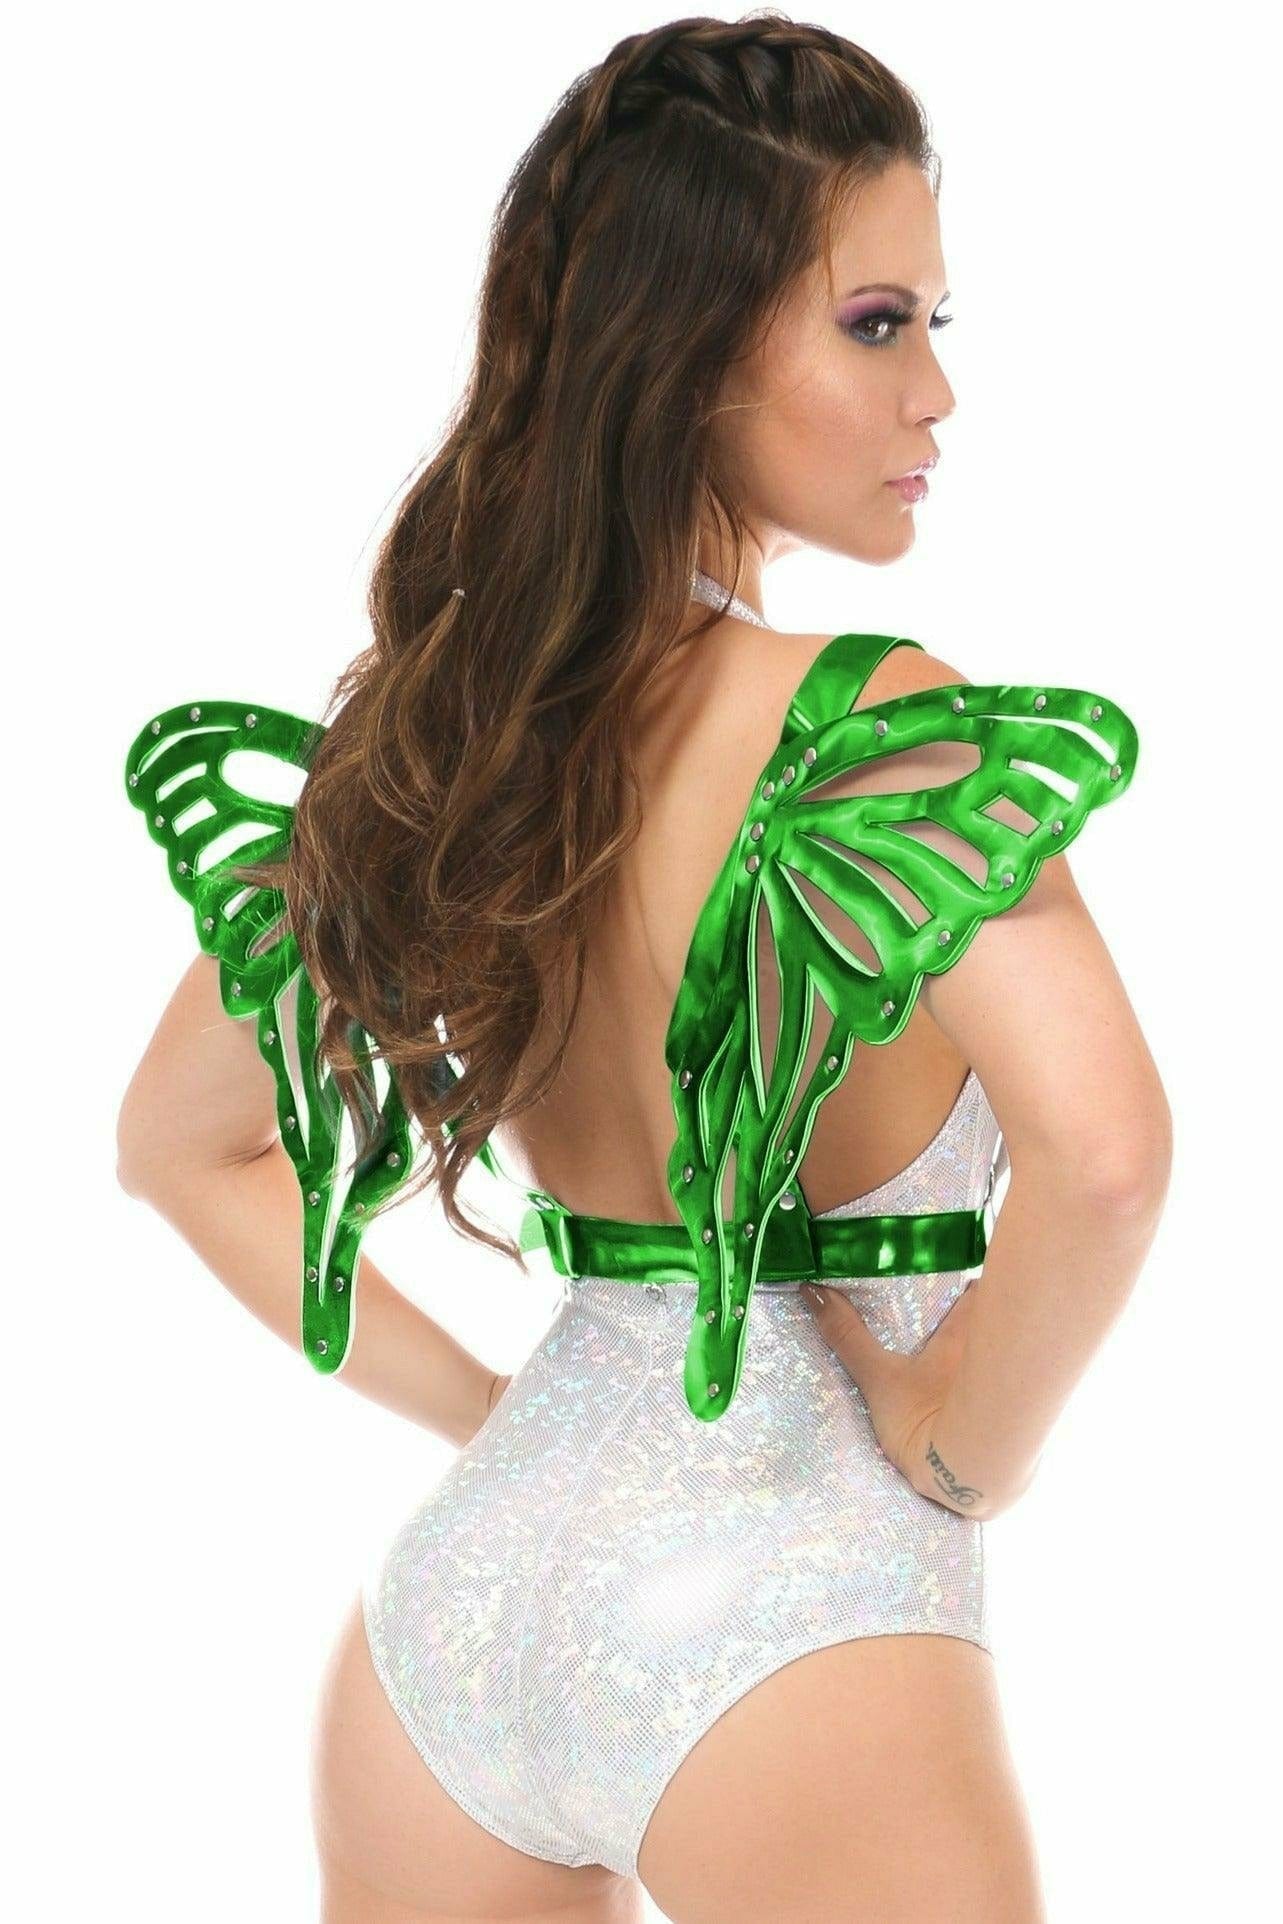 Green Hologram Large Butterfly Wing Body Harness Musotica.com